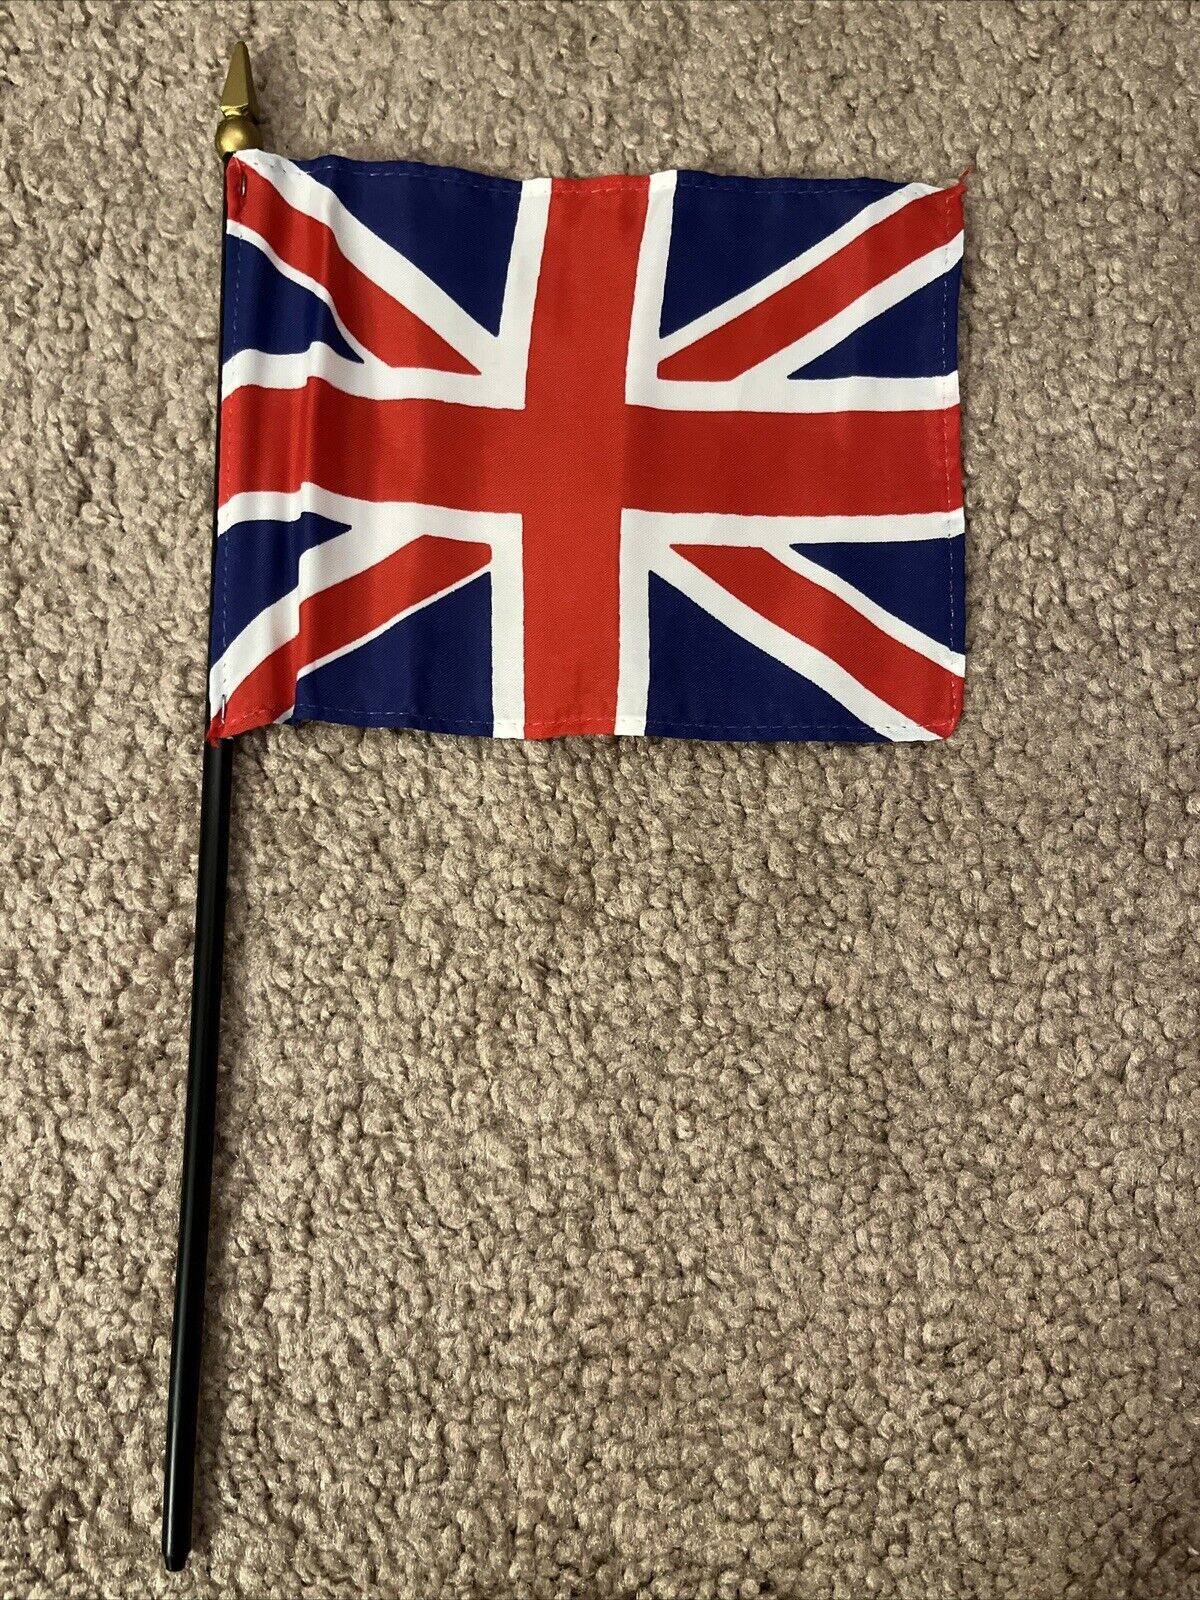 Union Jack Flag (Small) - British Souvenir Party Event Collectible Travel Gift